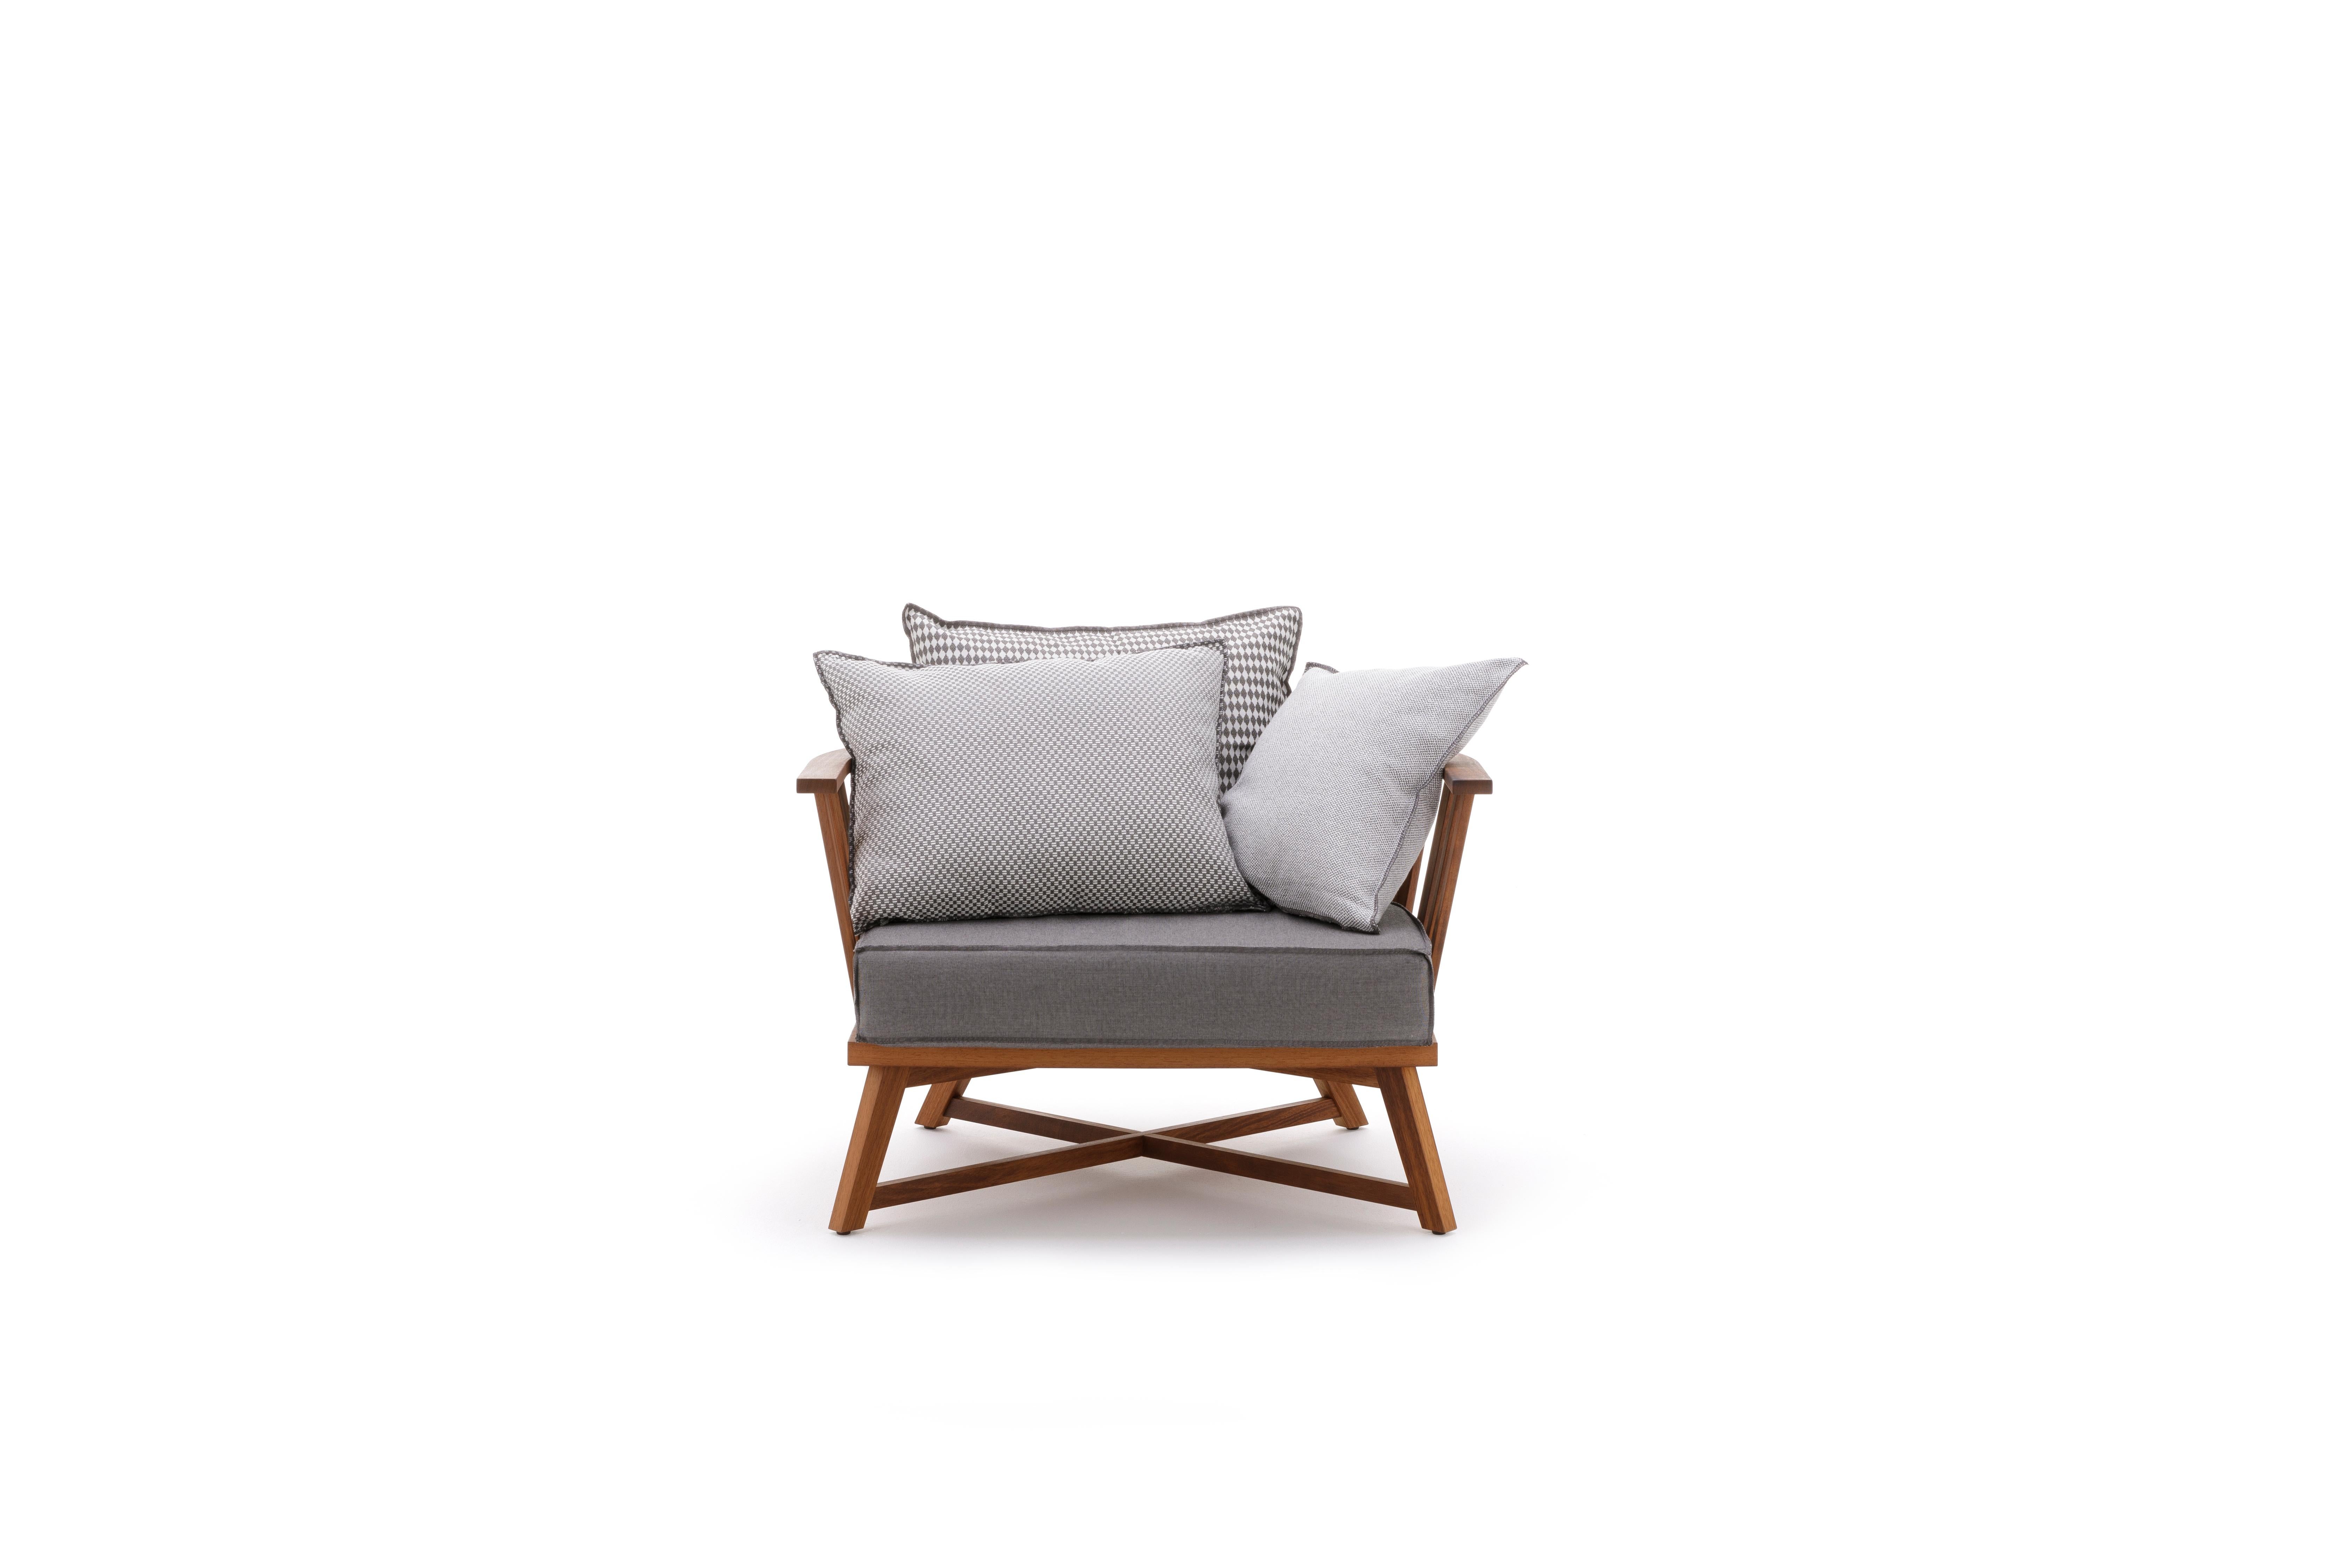 Gervasoni Inout Lounge Armchair in Rembrandt Upholstery with Oiled Iroko